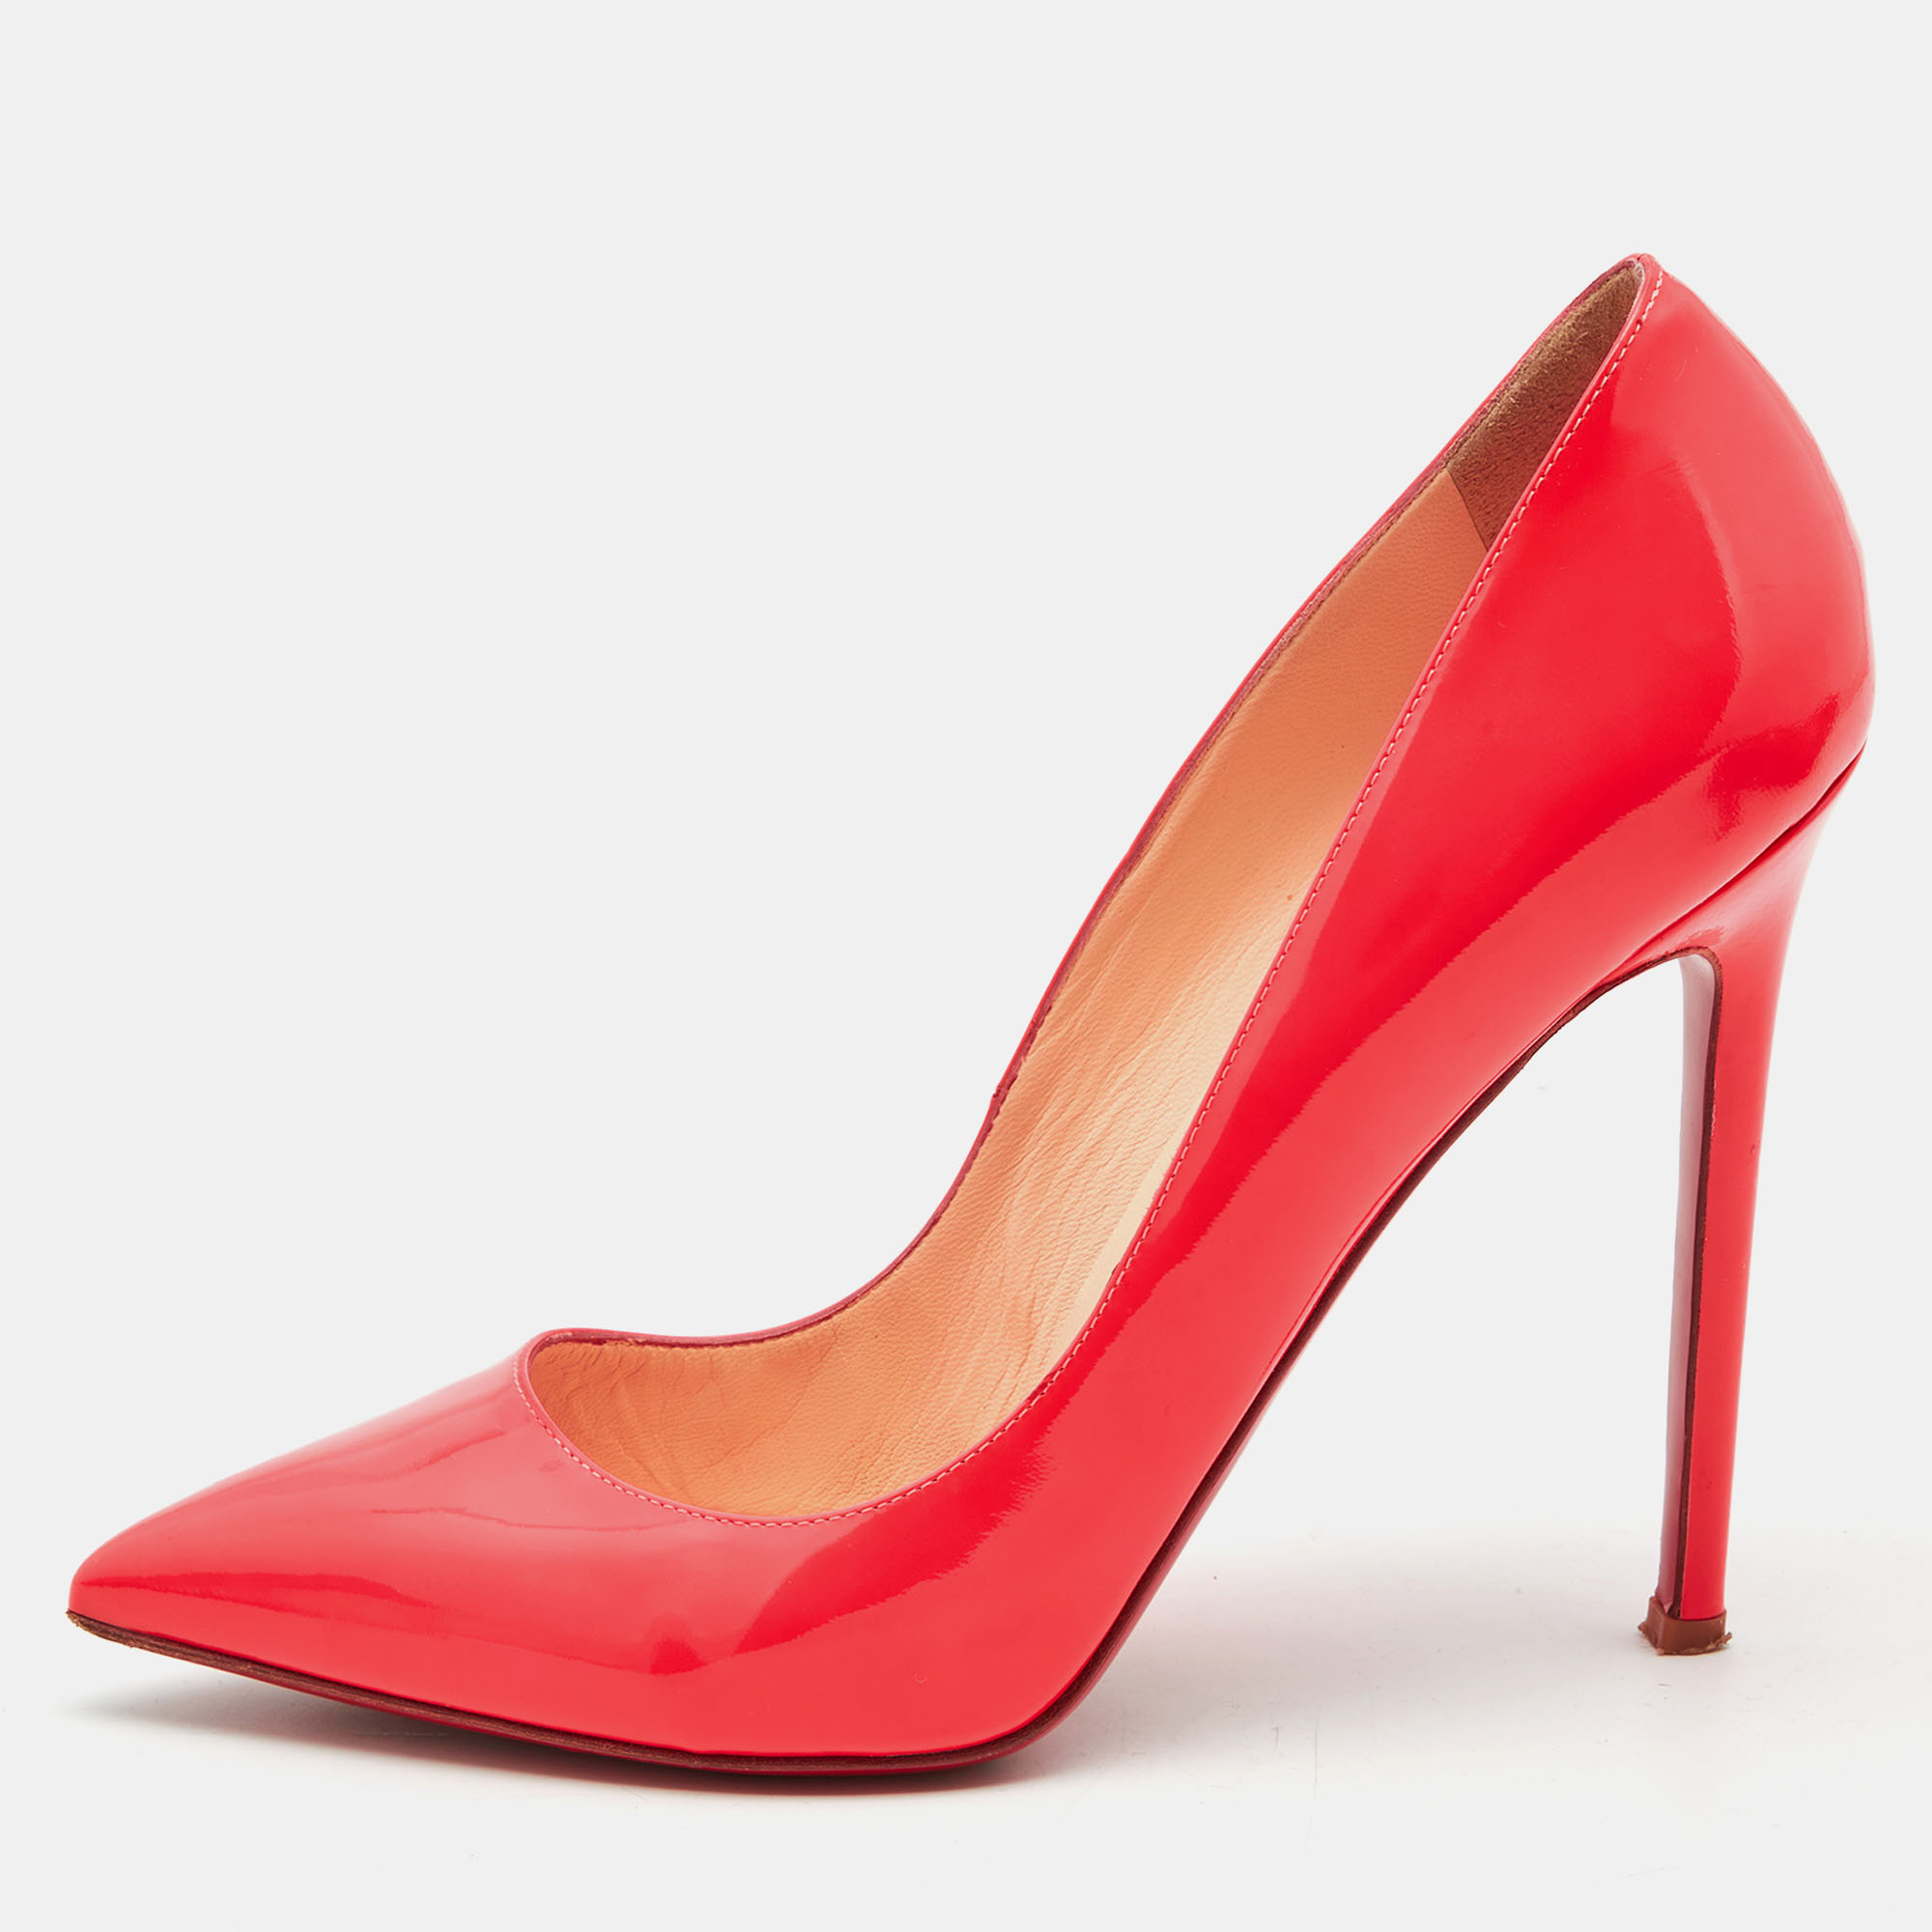 

Christian Louboutin Neon Coral Patent Leather So Kate Pointed Toe Pumps Size 40.5, Orange